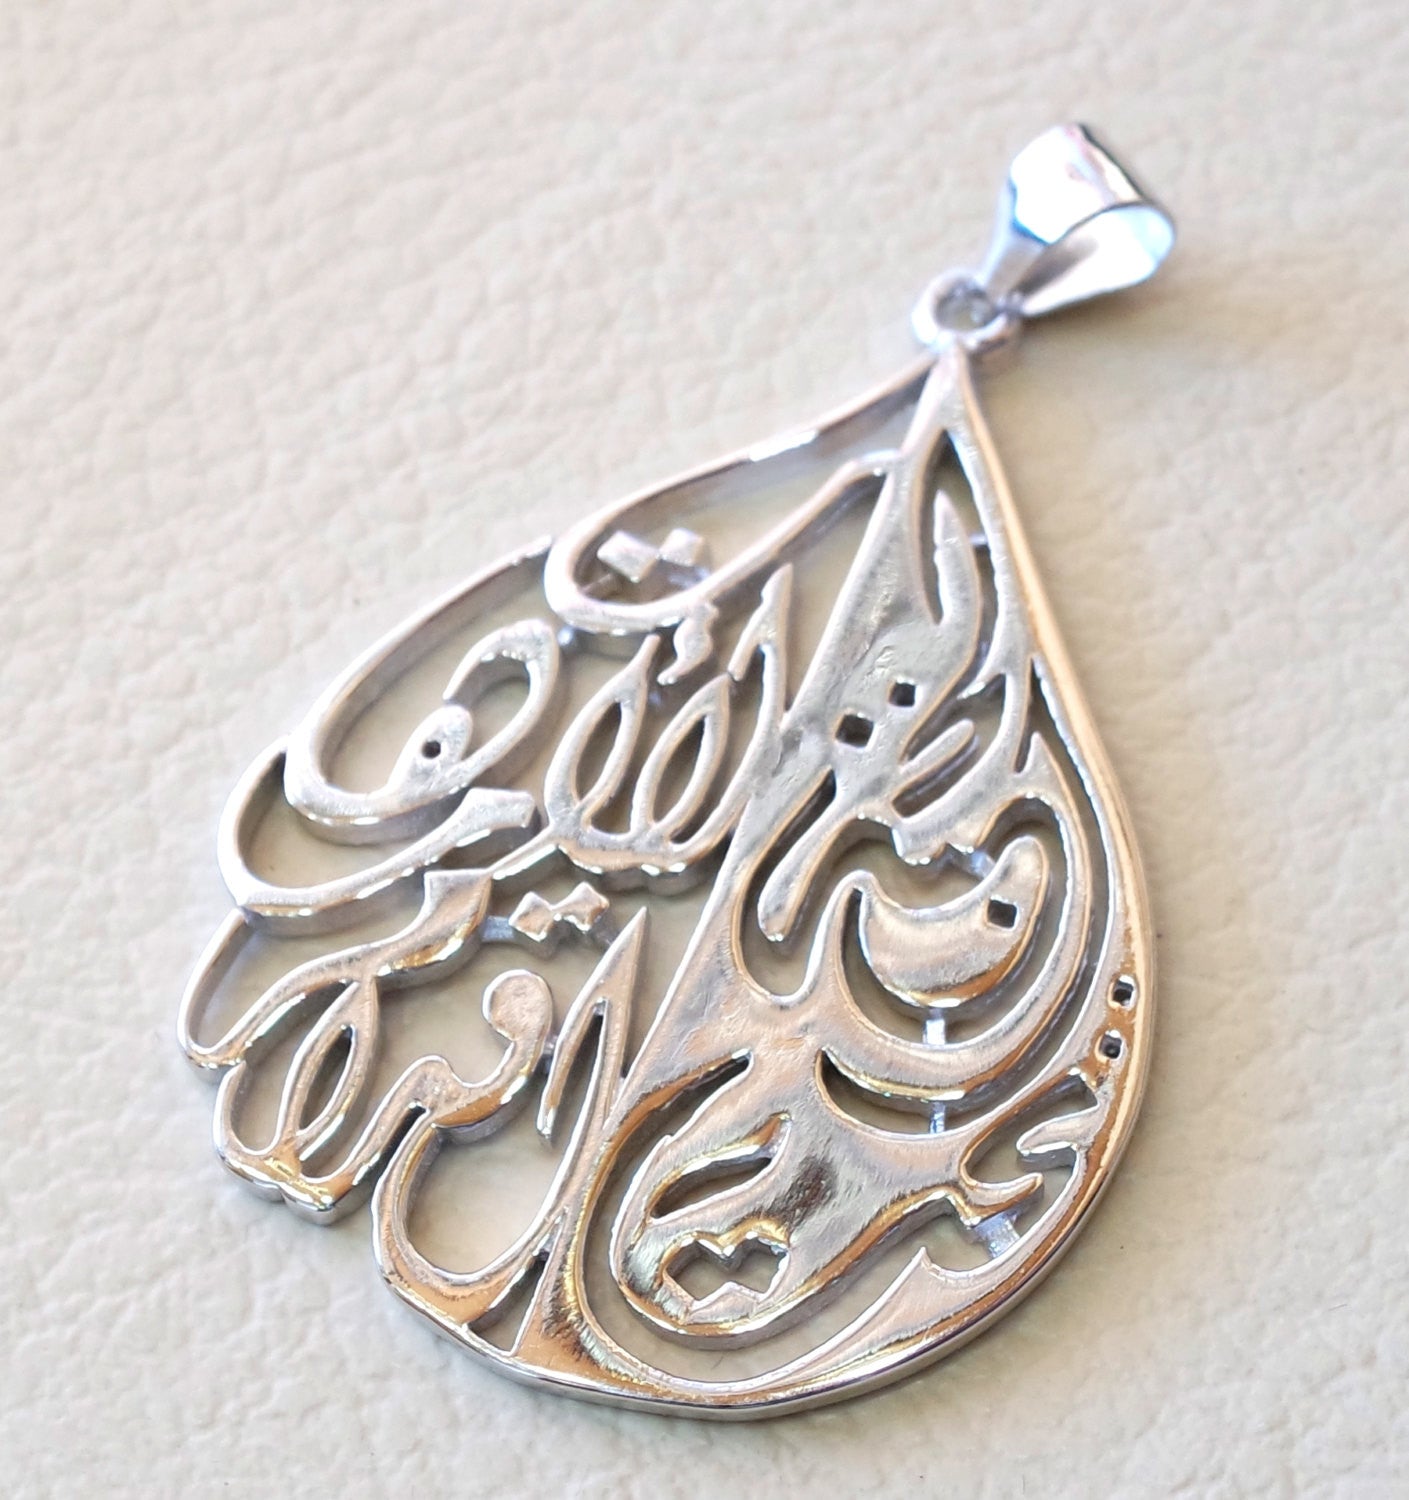 Paradise under the feet of mother sterling silver big arabic pendant 925 k high quality jewelry handmade fast shipping mother gift عربي